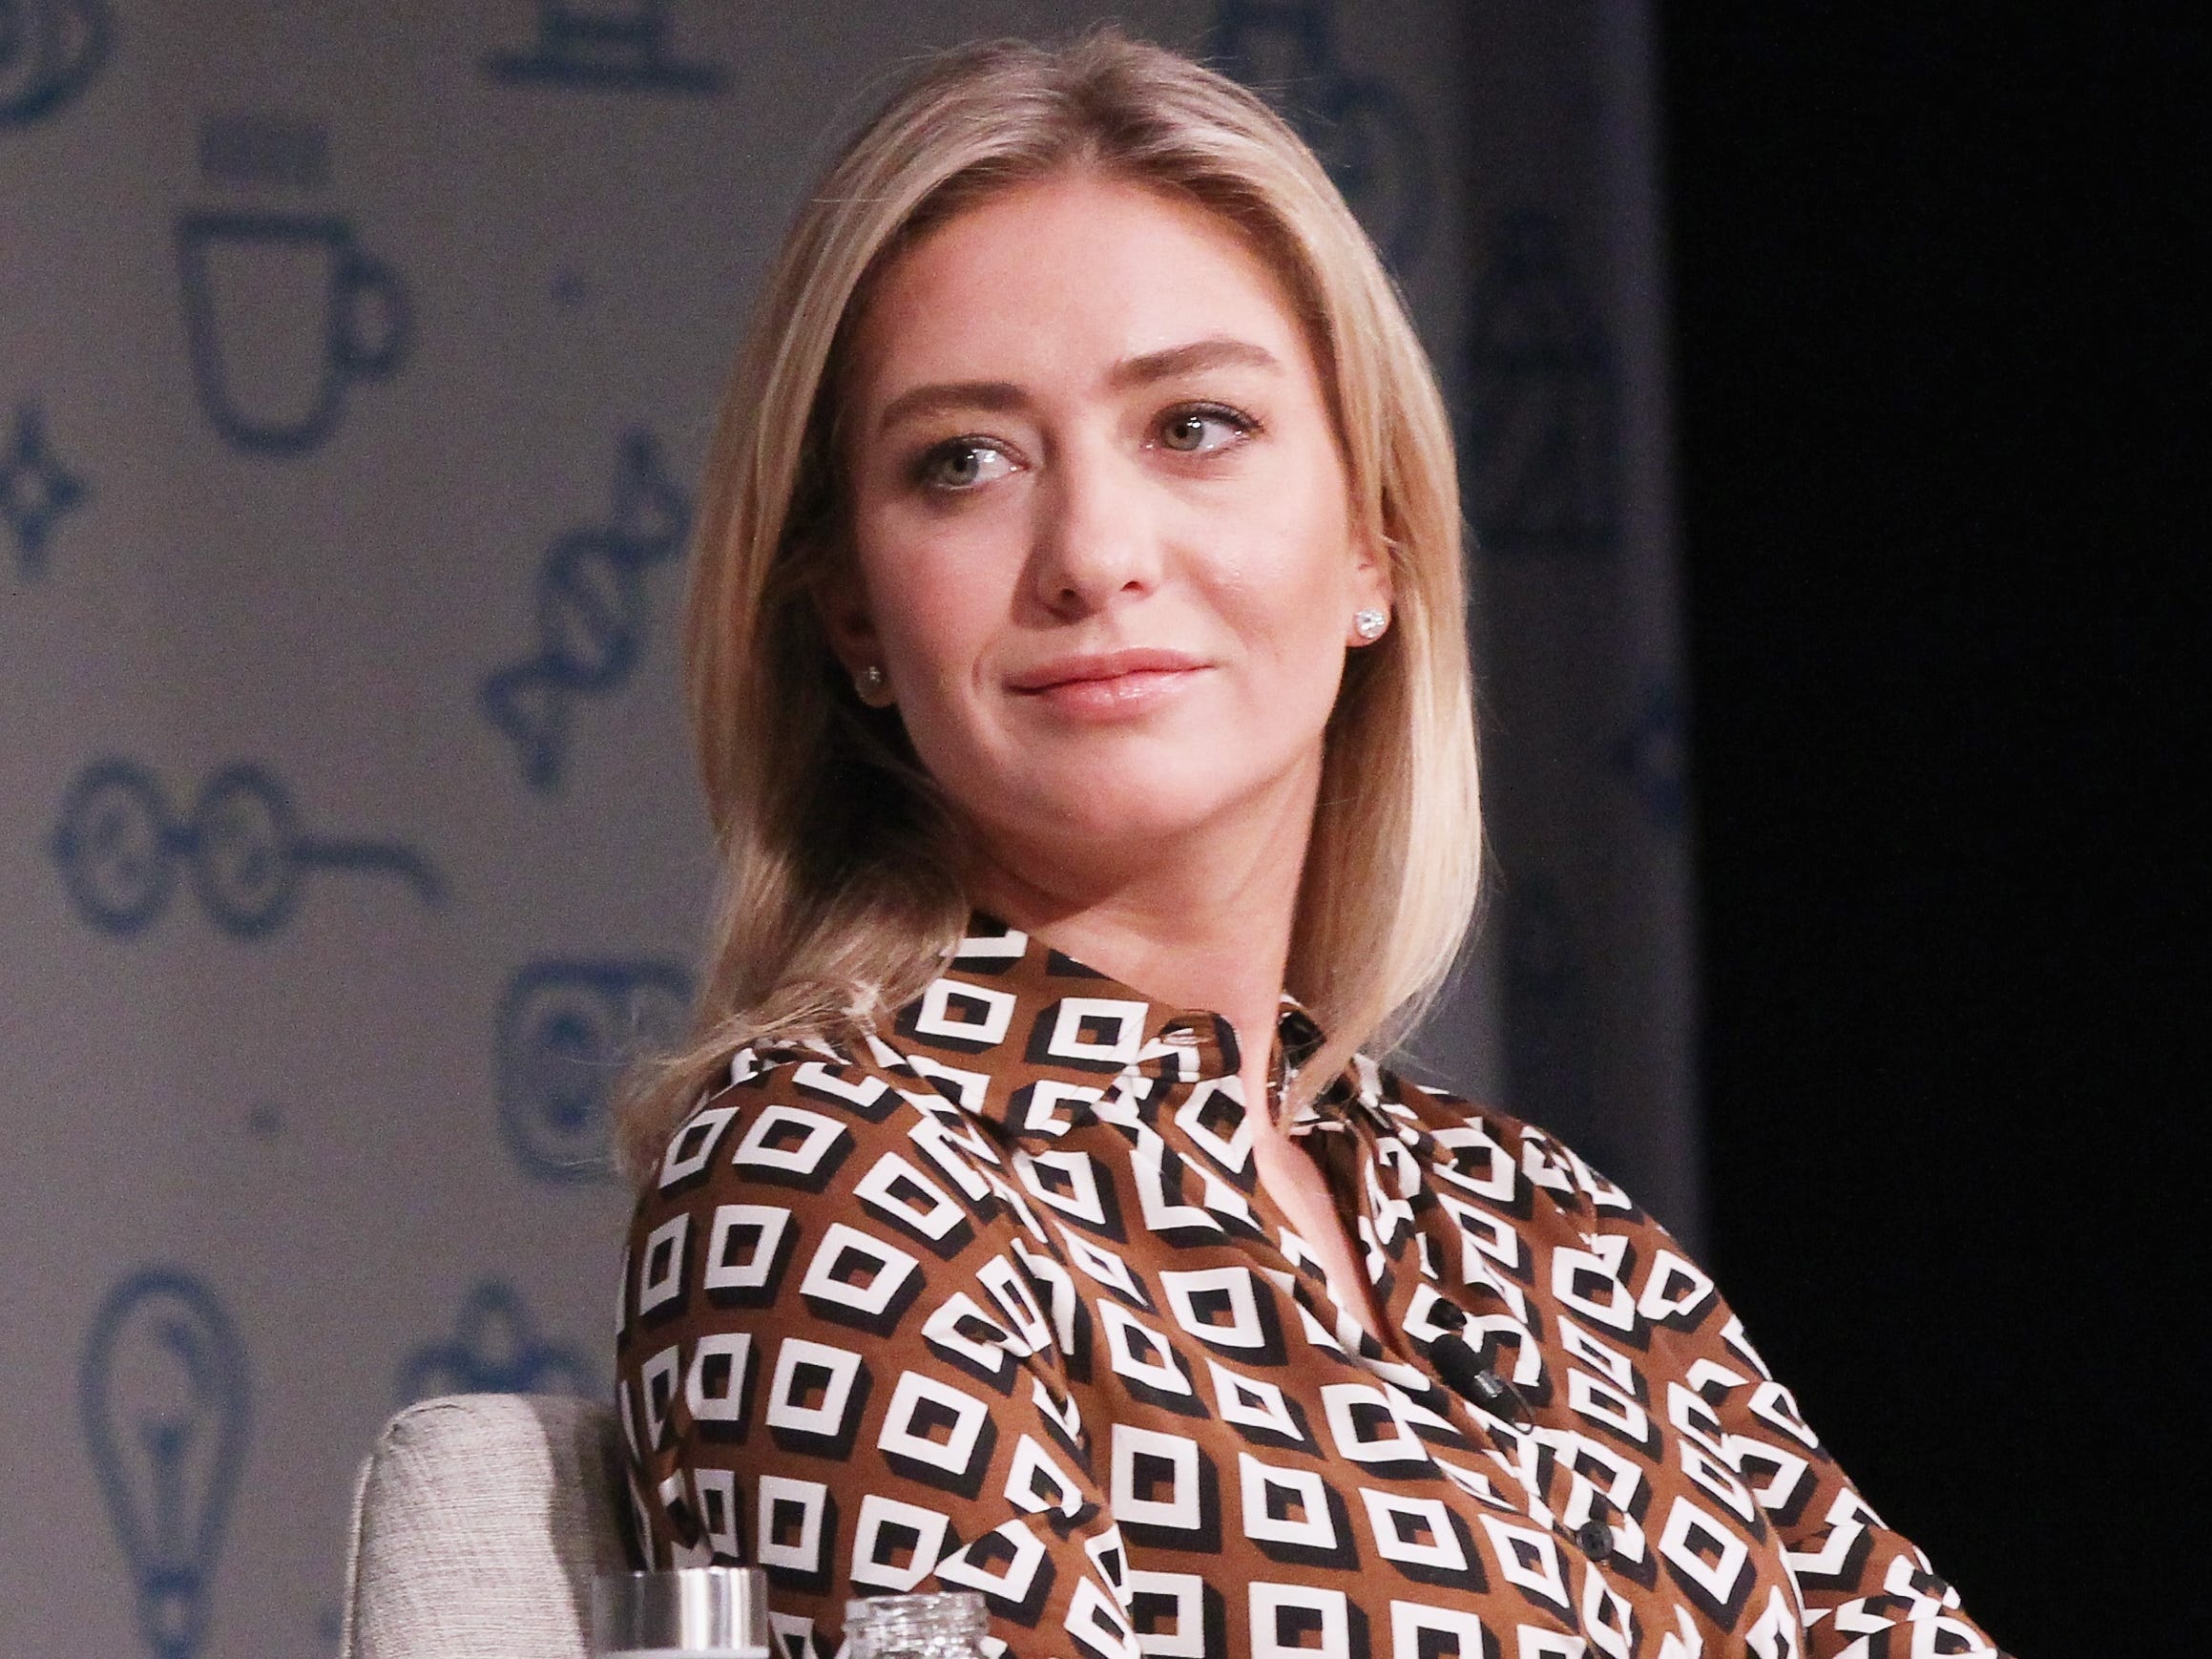 Whitney Wolfe Herd wears a brown and white dress while sitting on stage.